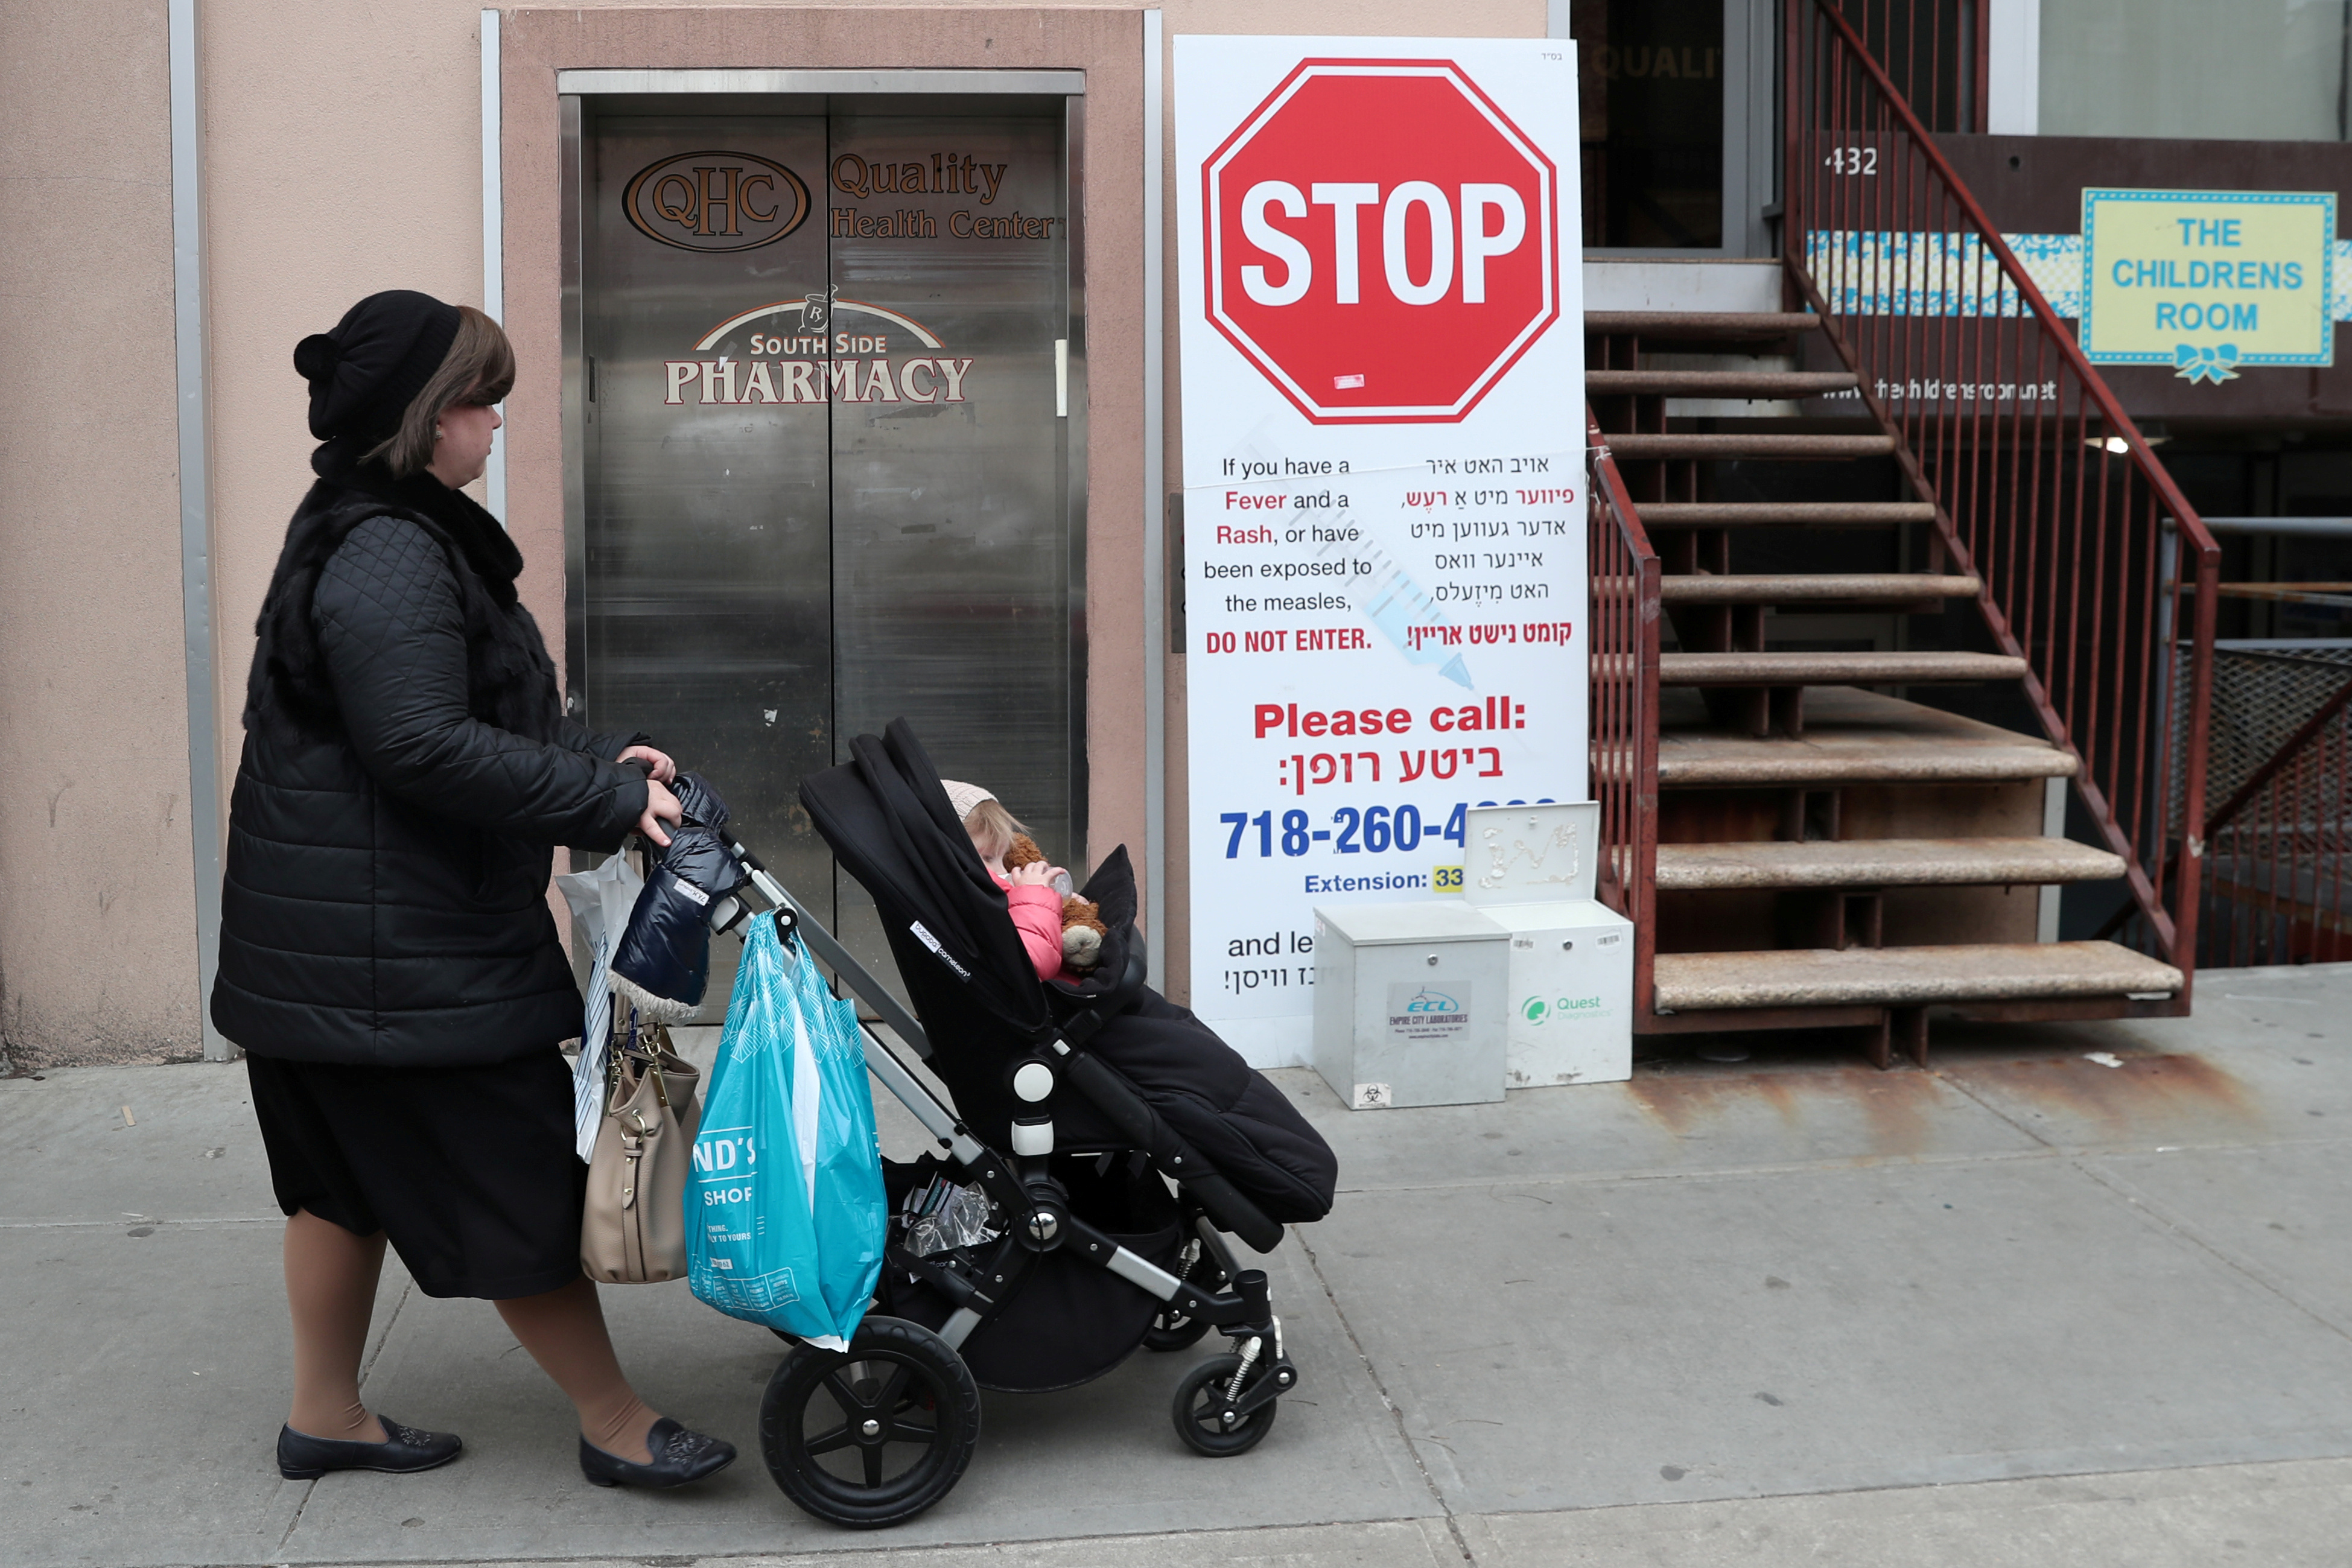 New York - U.S. Sees Surge In Confirmed Cases Of Measles, CDC Reports